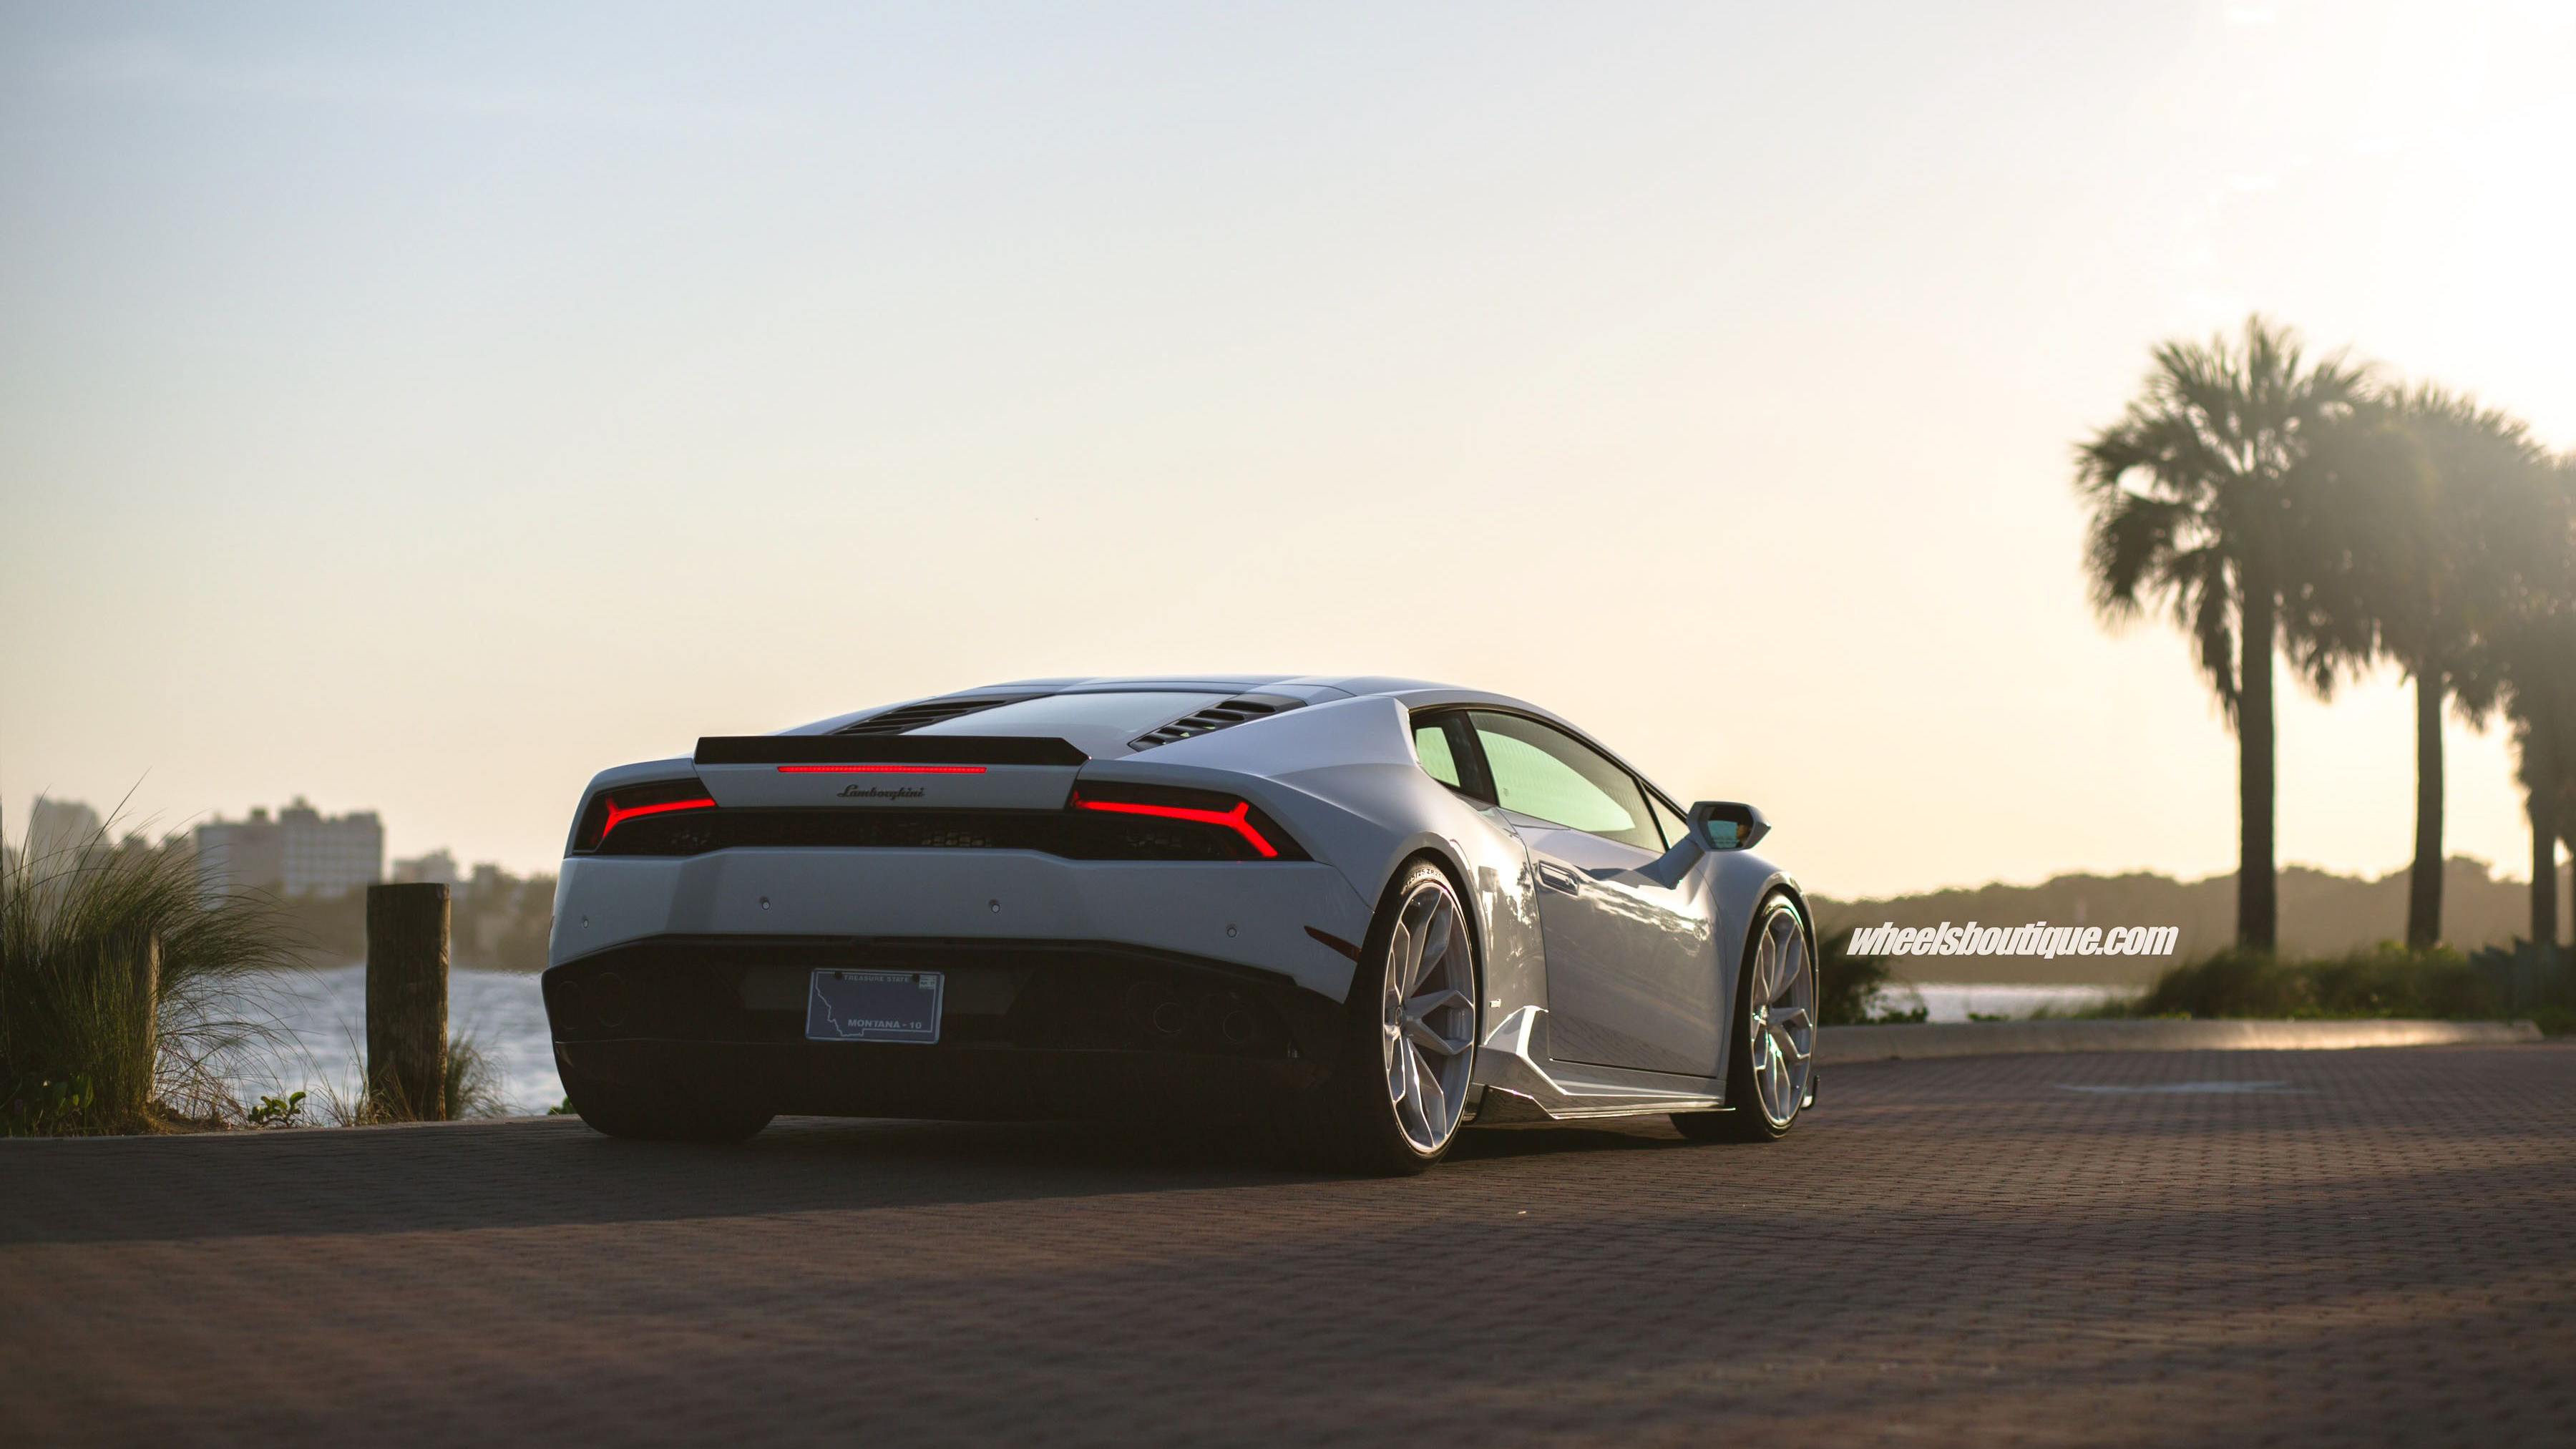 White Lamborghini Huracan Rear 4k, HD Cars, 4k Wallpapers, Images,  Backgrounds, Photos and Pictures